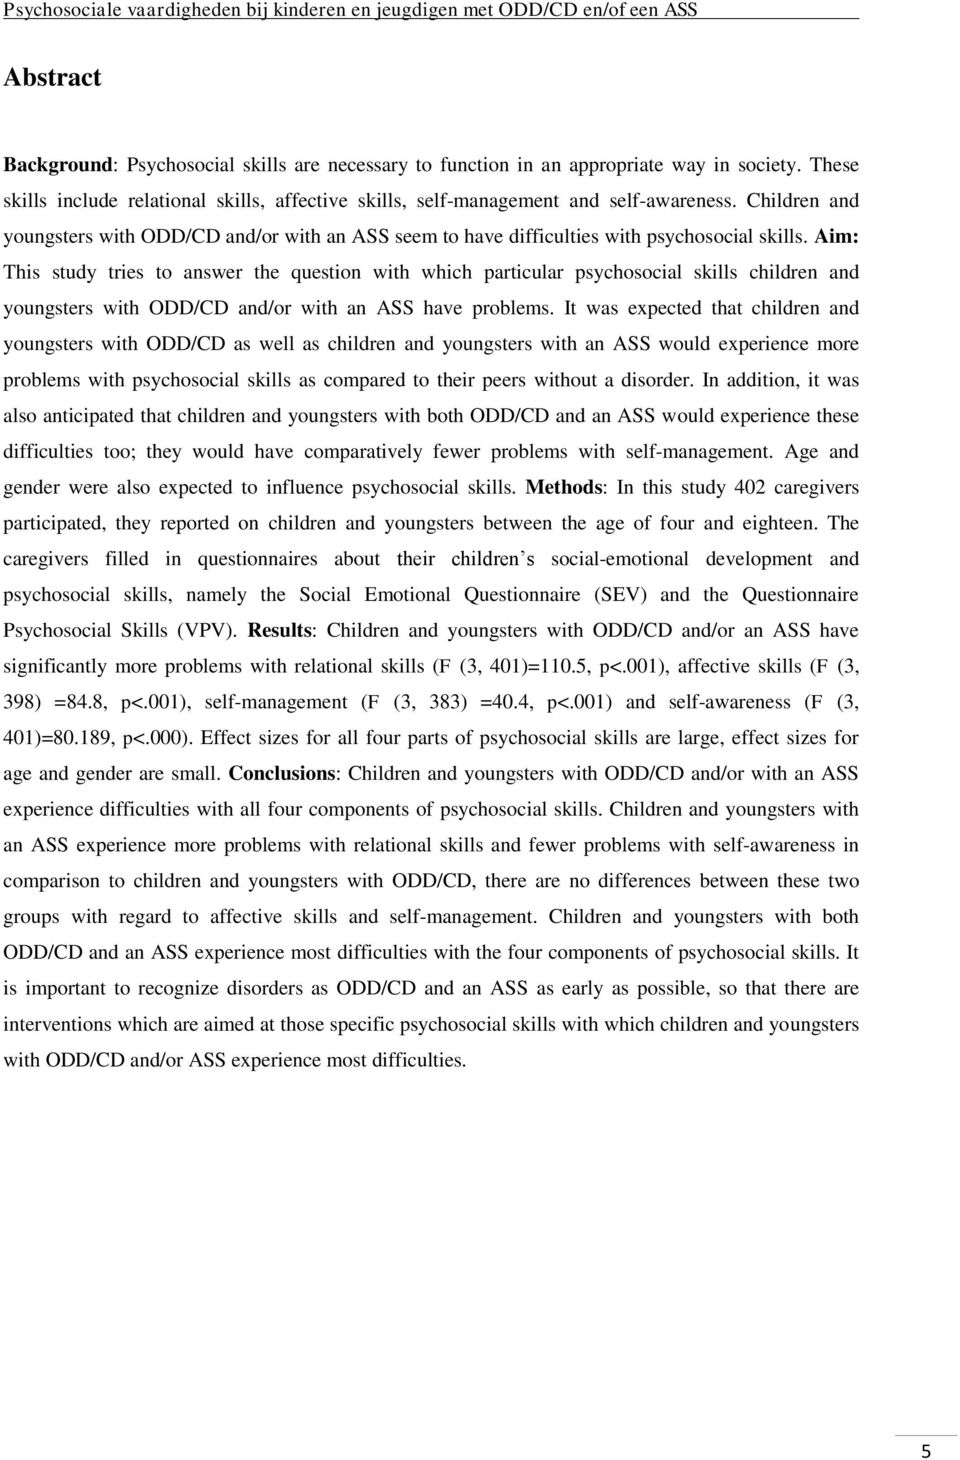 Aim: This study tries to answer the question with which particular psychosocial skills children and youngsters with ODD/CD and/or with an ASS have problems.